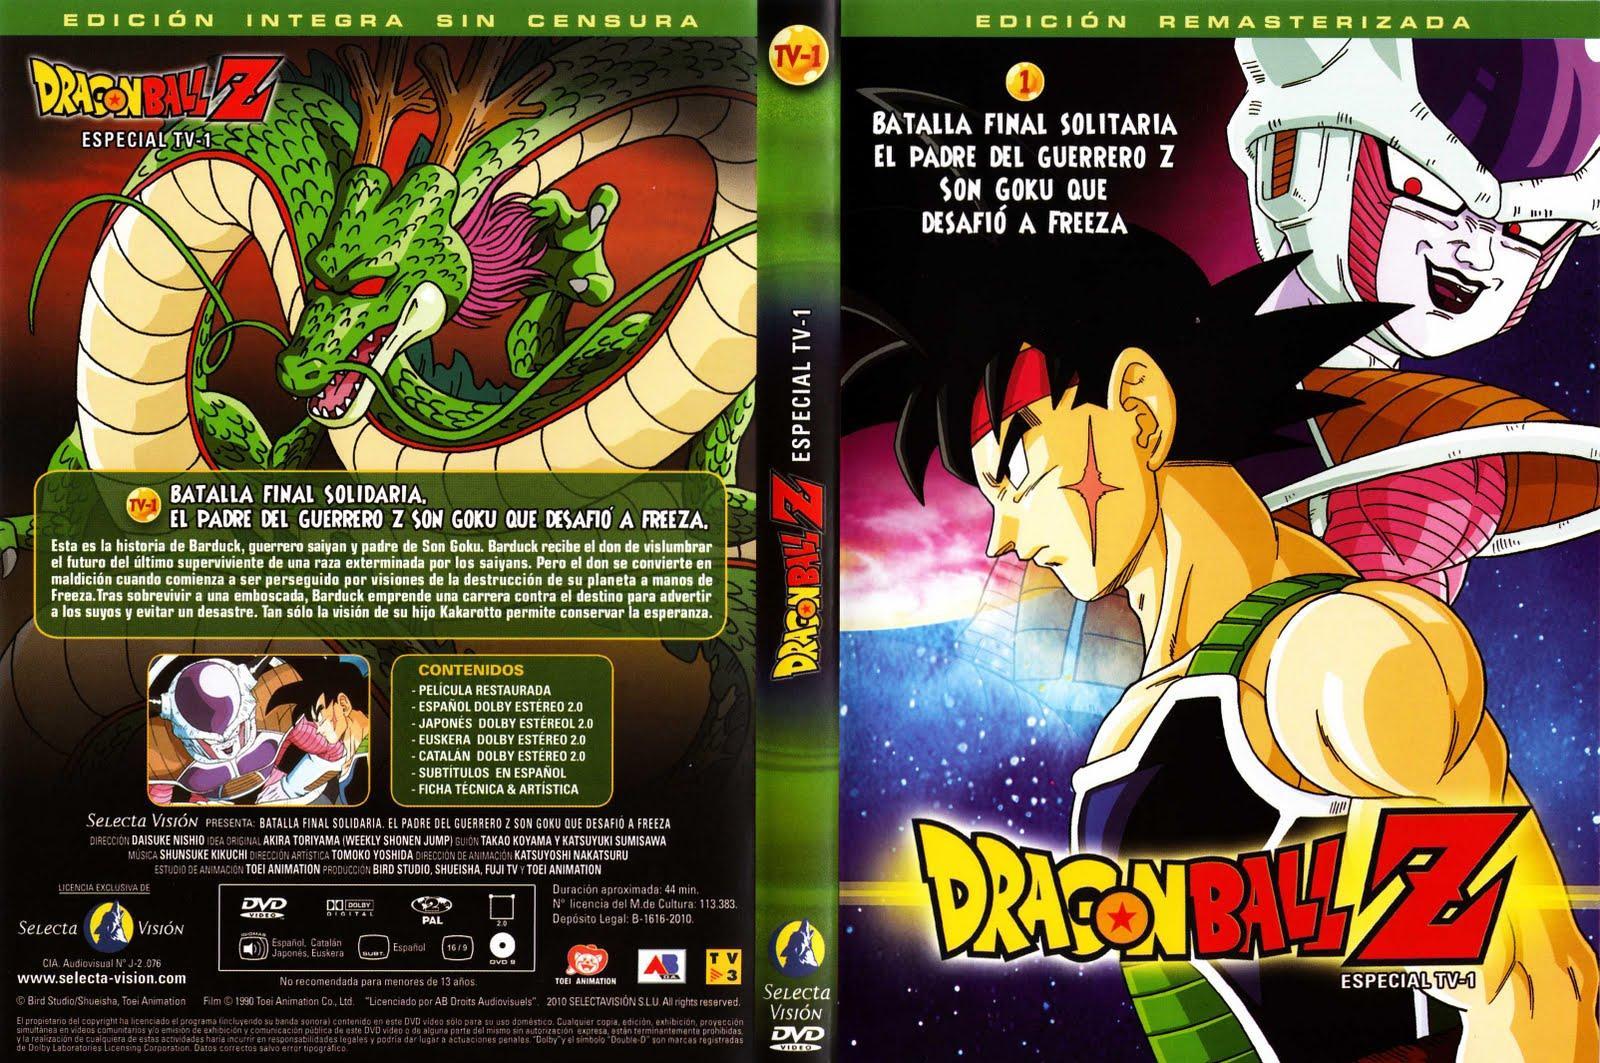 Image gallery for Dragon Ball Z Special 1: Bardock, The Father of Goku (TV)  - FilmAffinity